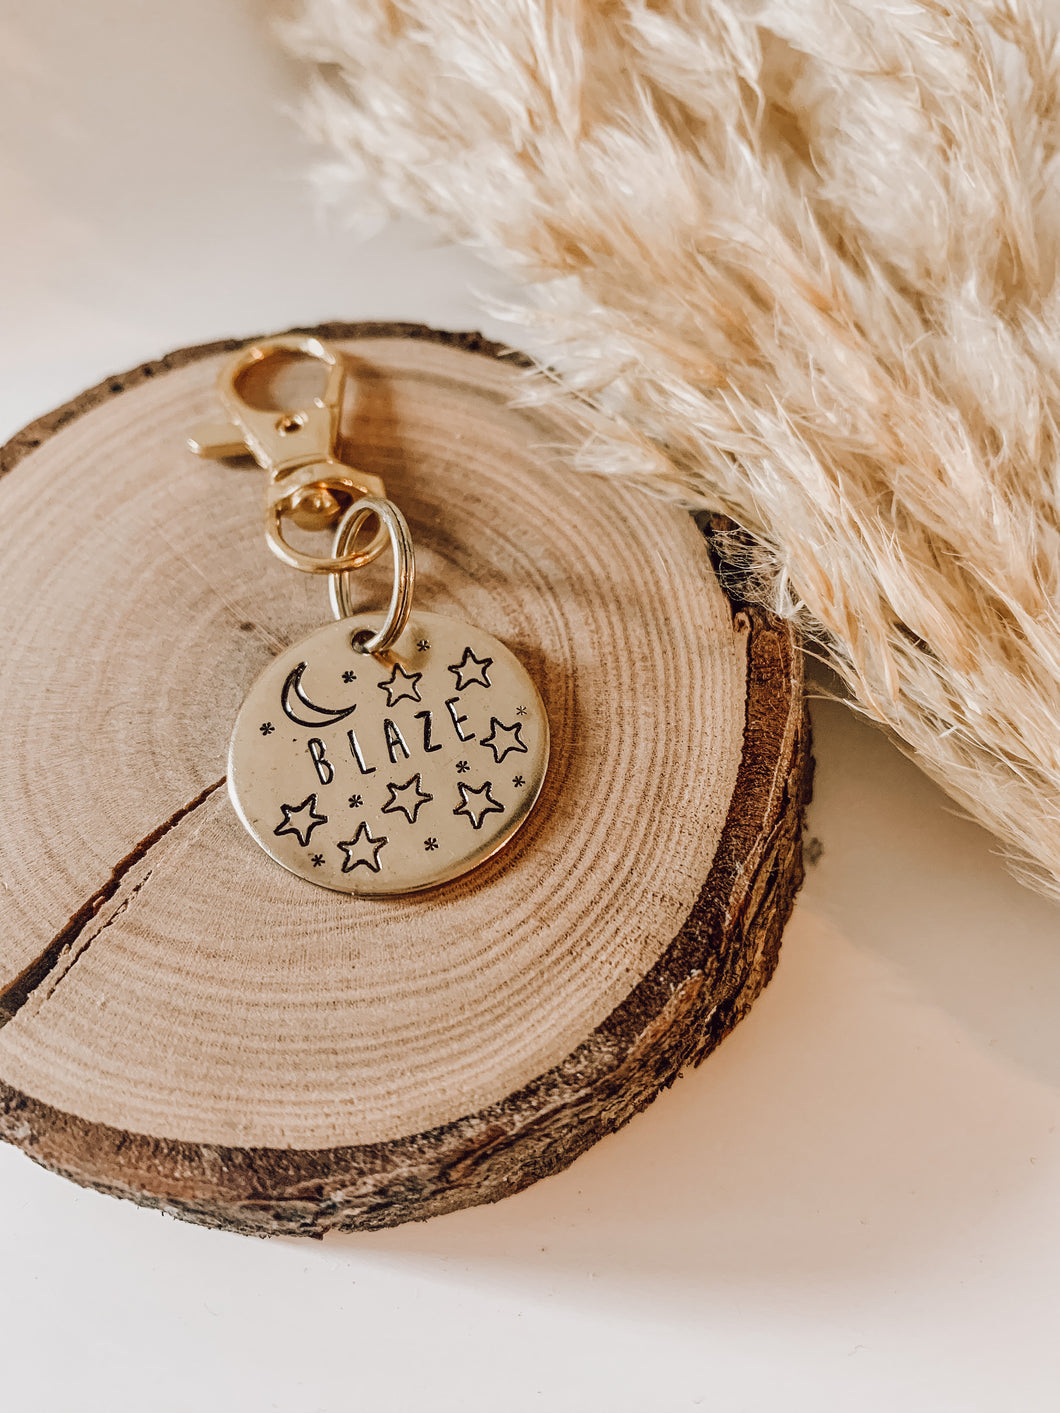 The Night Sky | Hand Stamped Metal Pet ID Tag